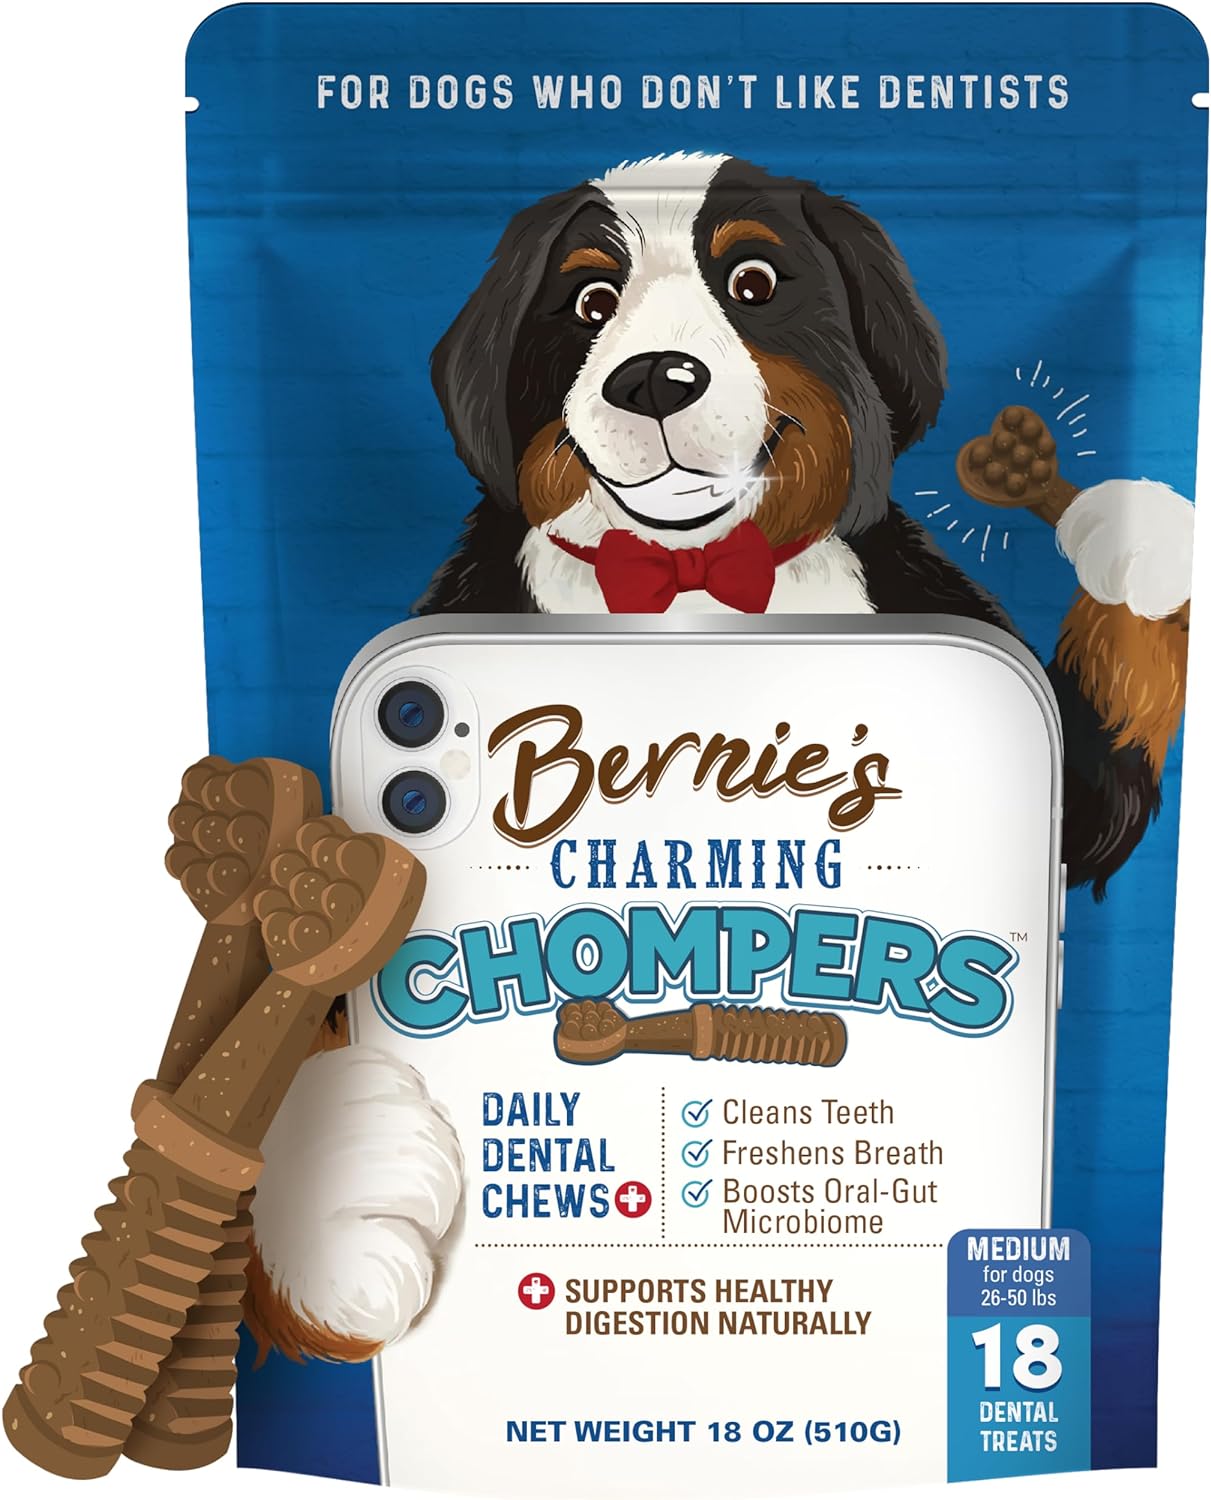 Bernie's Charming Chompers - Daily Dental Chews for Dogs 26-50 Lbs. - 18 Count - Cleans Teeth, Freshens Breath, Boosts Oral-Gut Microbiome. Easy to Digest, Supports Healthy Digestion Naturally